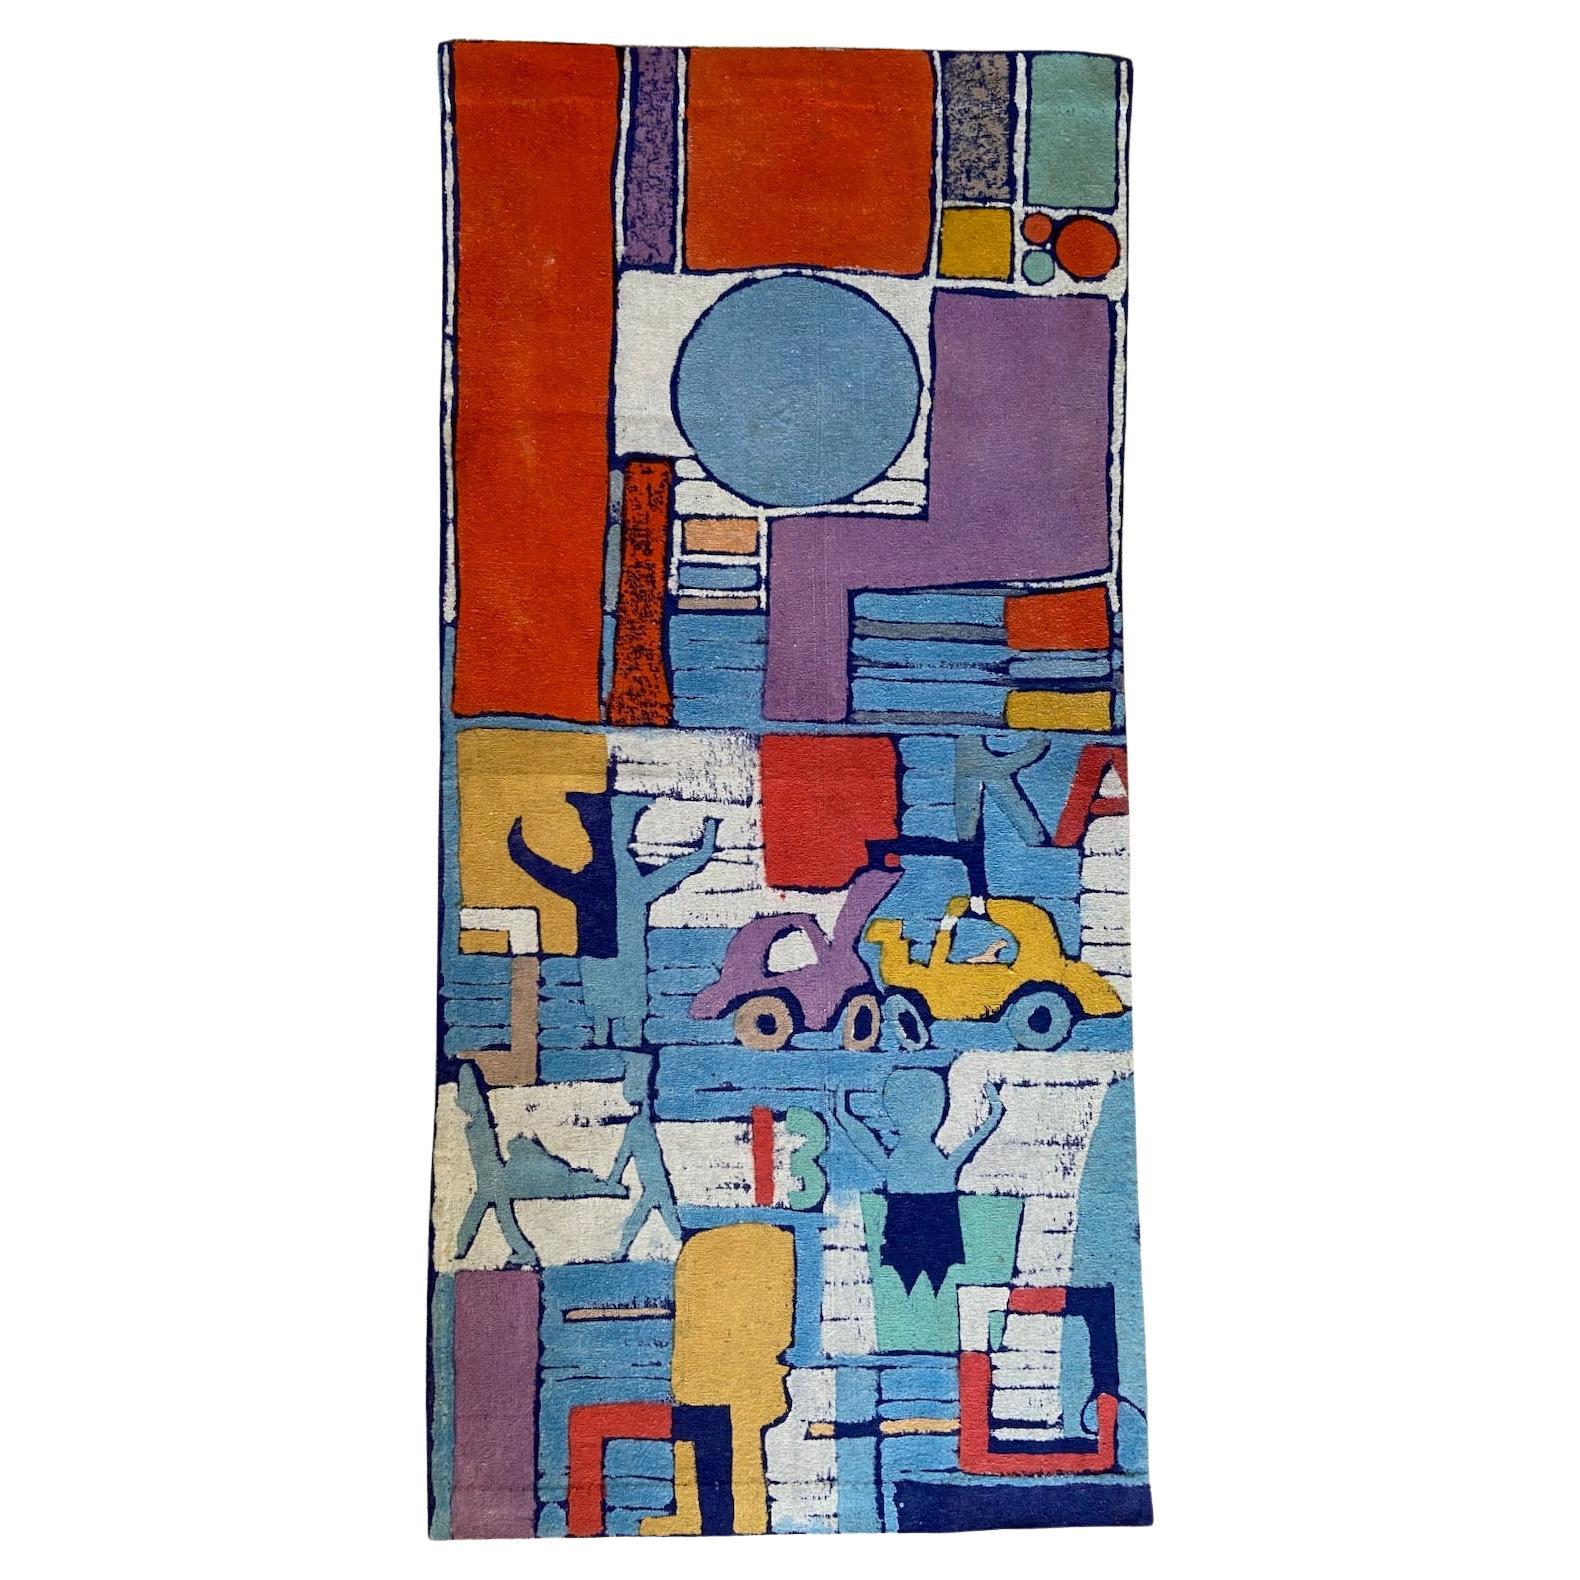 Michael O'Connell, "car crash", paste resist painting on woven textile, 1950s For Sale